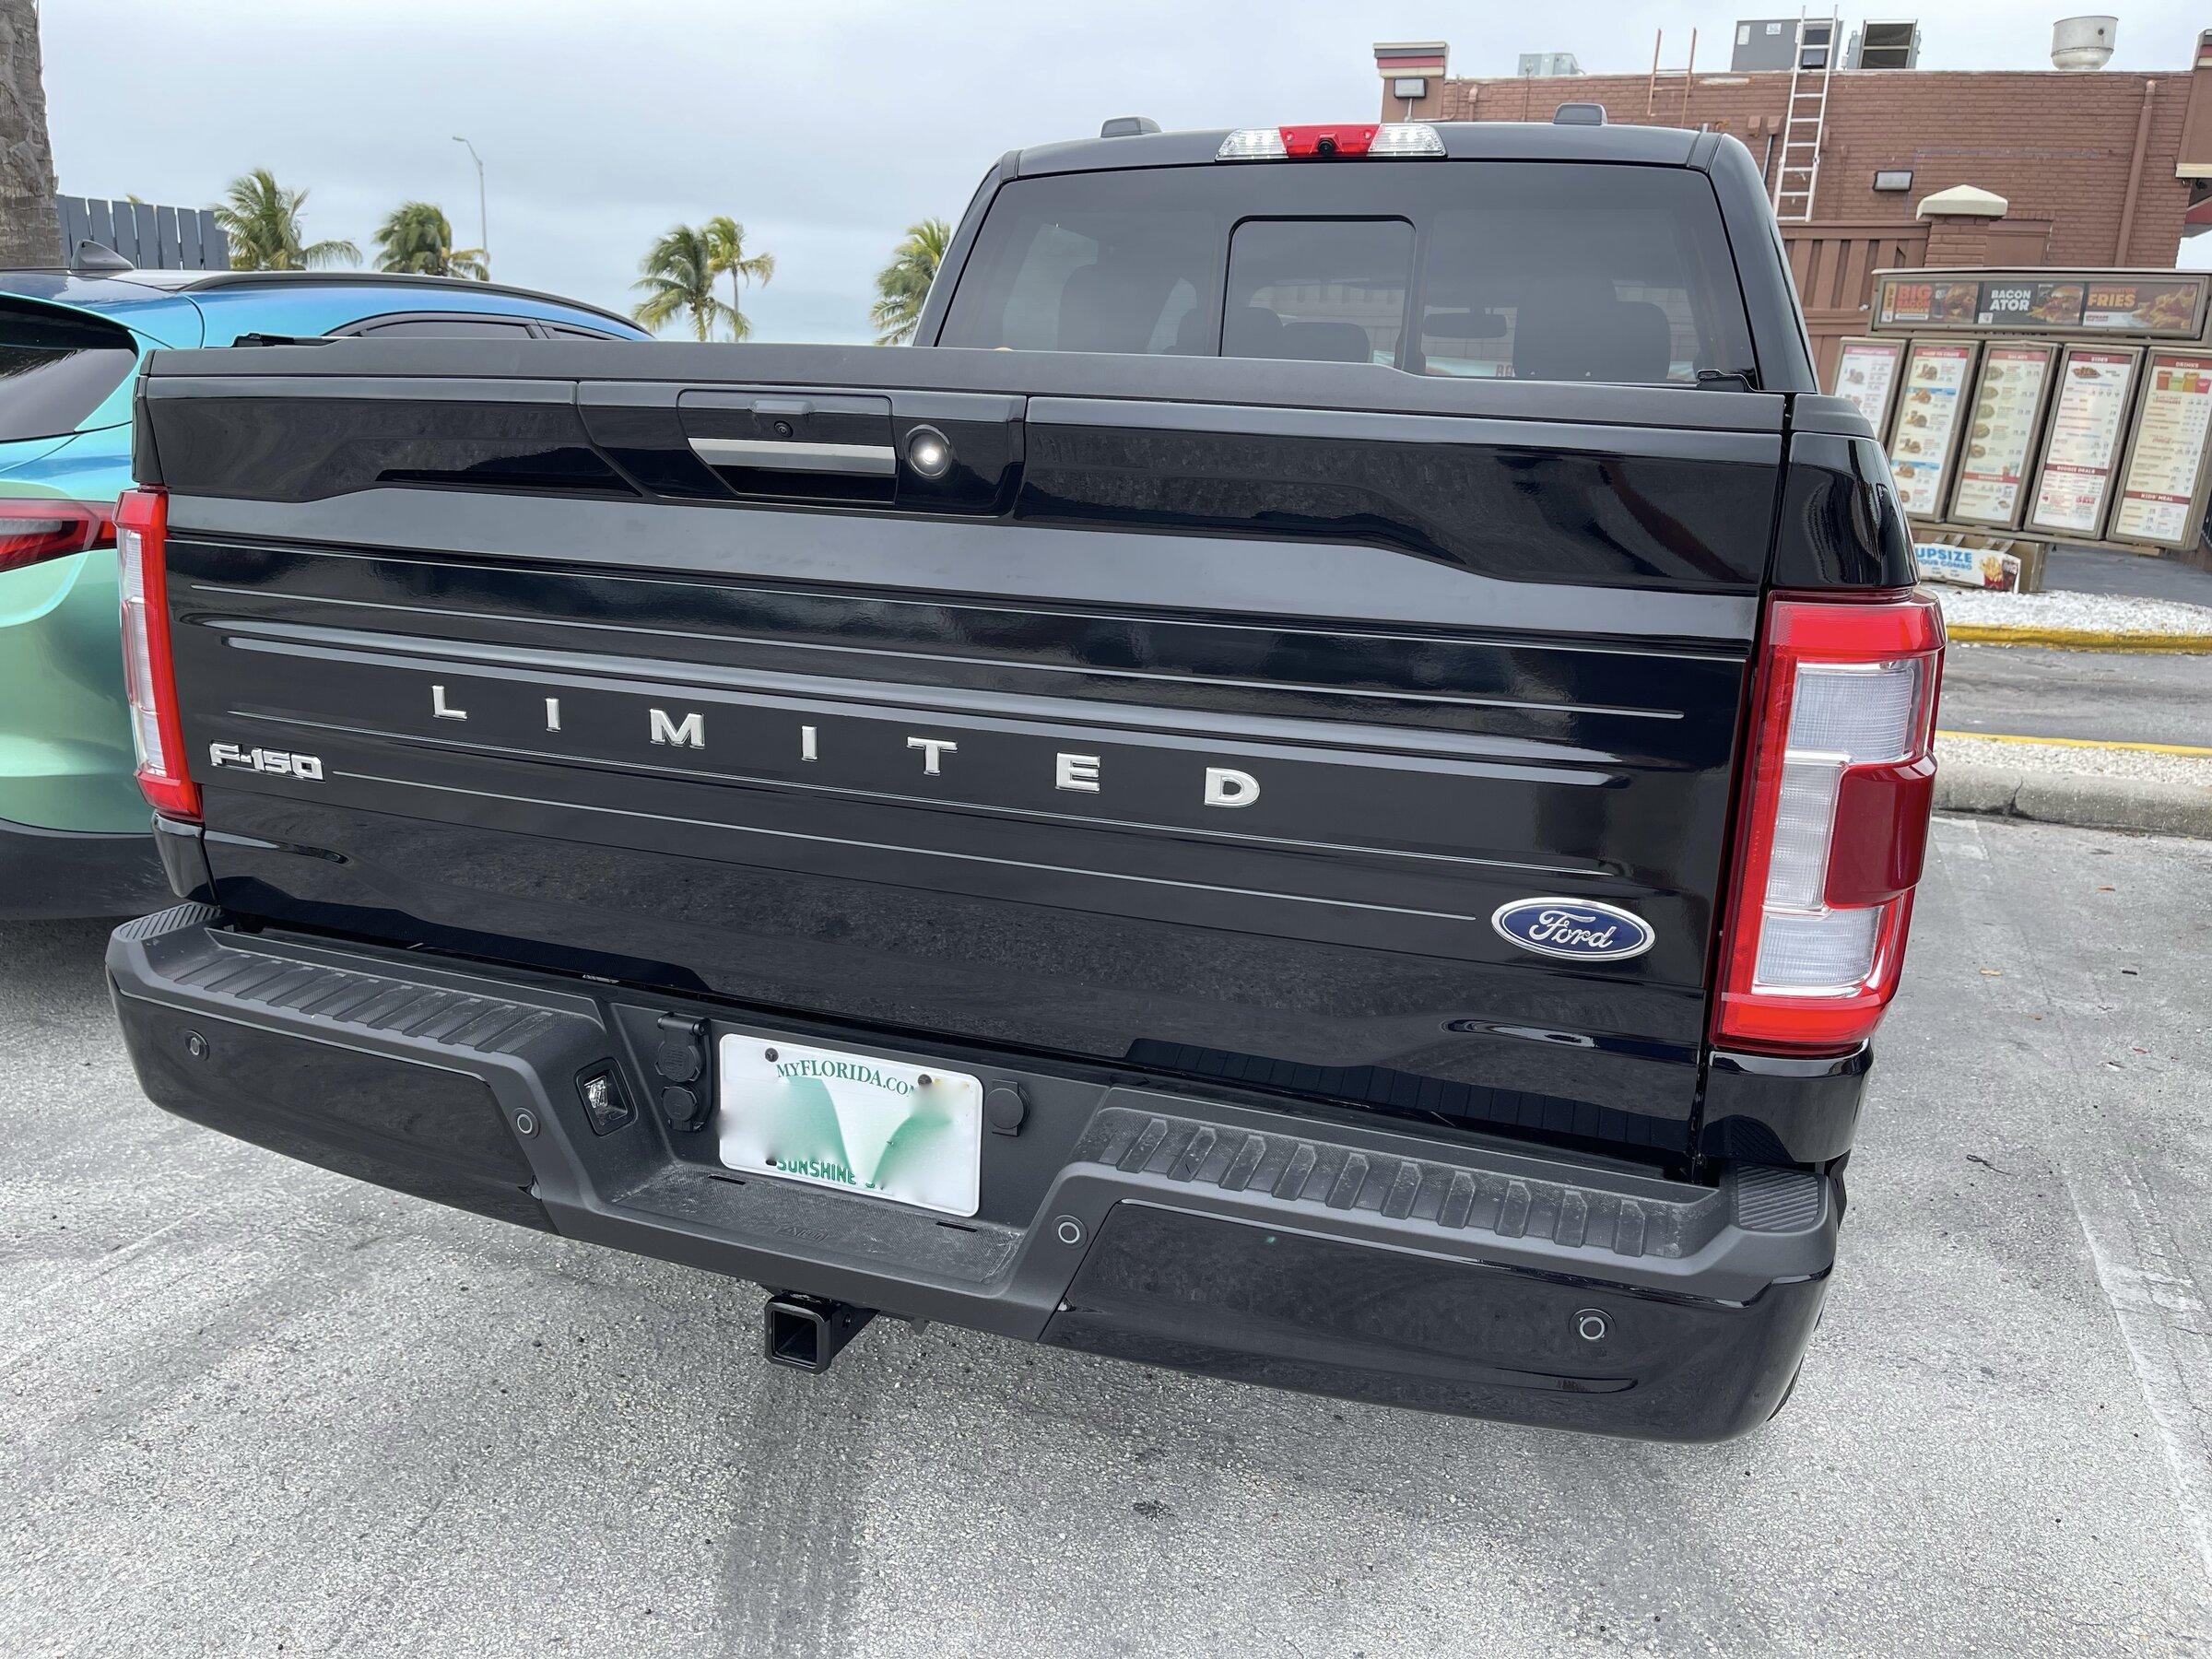 Ford F-150 Lightning Wrapped Limited Chrome Badge Bar on Tailgate 74A1F31F-65B4-4700-BF03-52615FF030E8_1_201_a